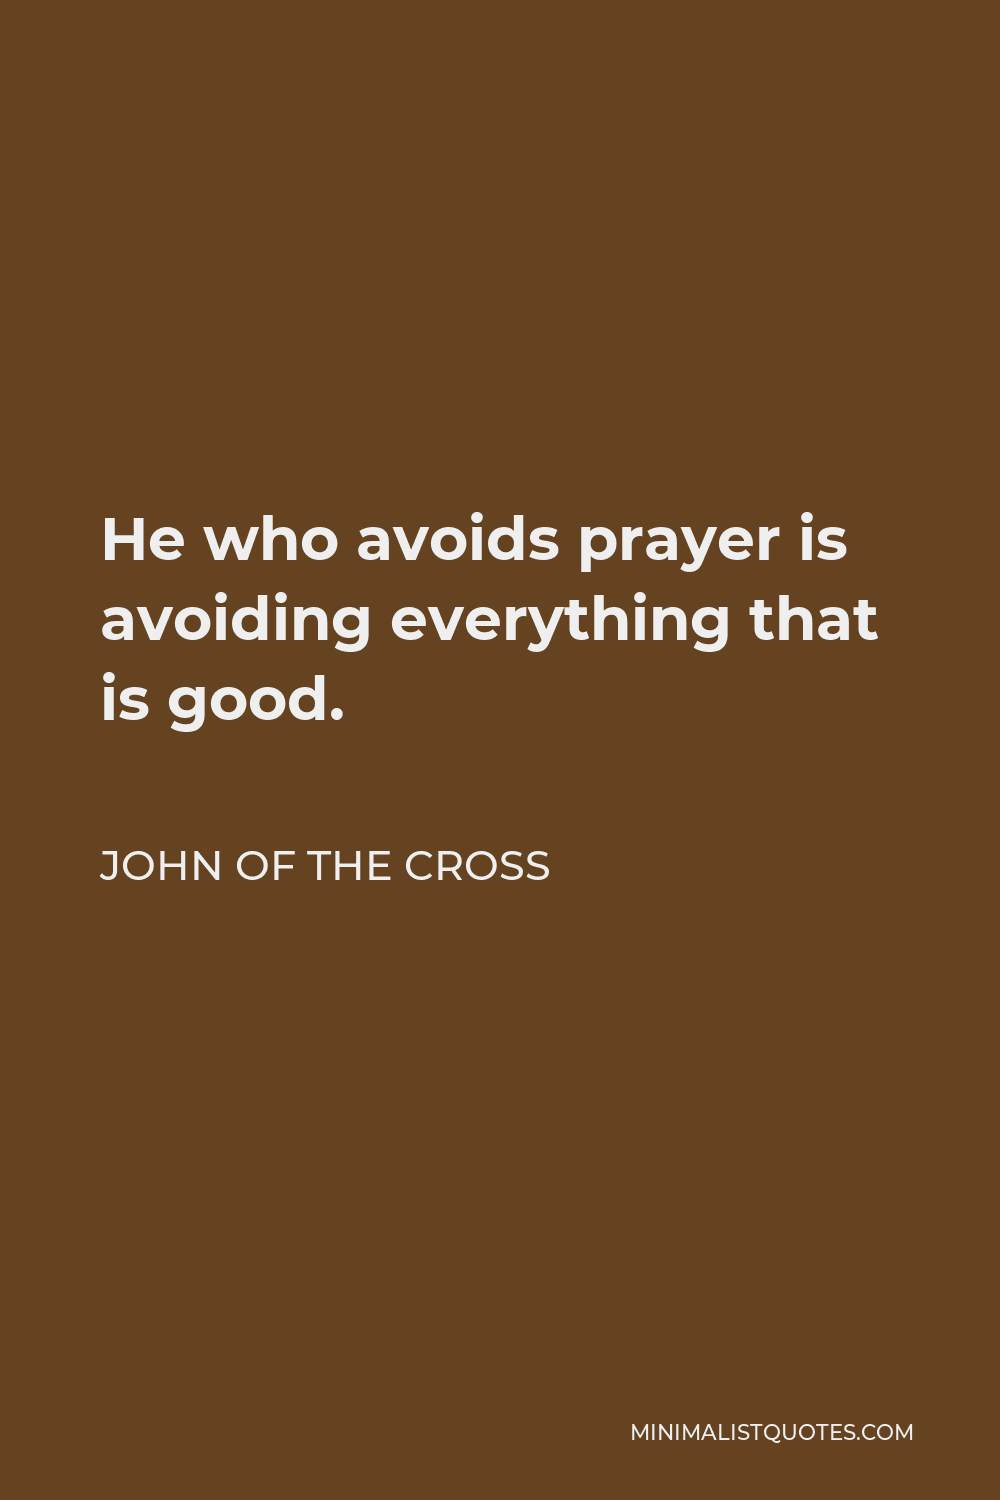 John of the Cross Quote - He who avoids prayer is avoiding everything that is good.